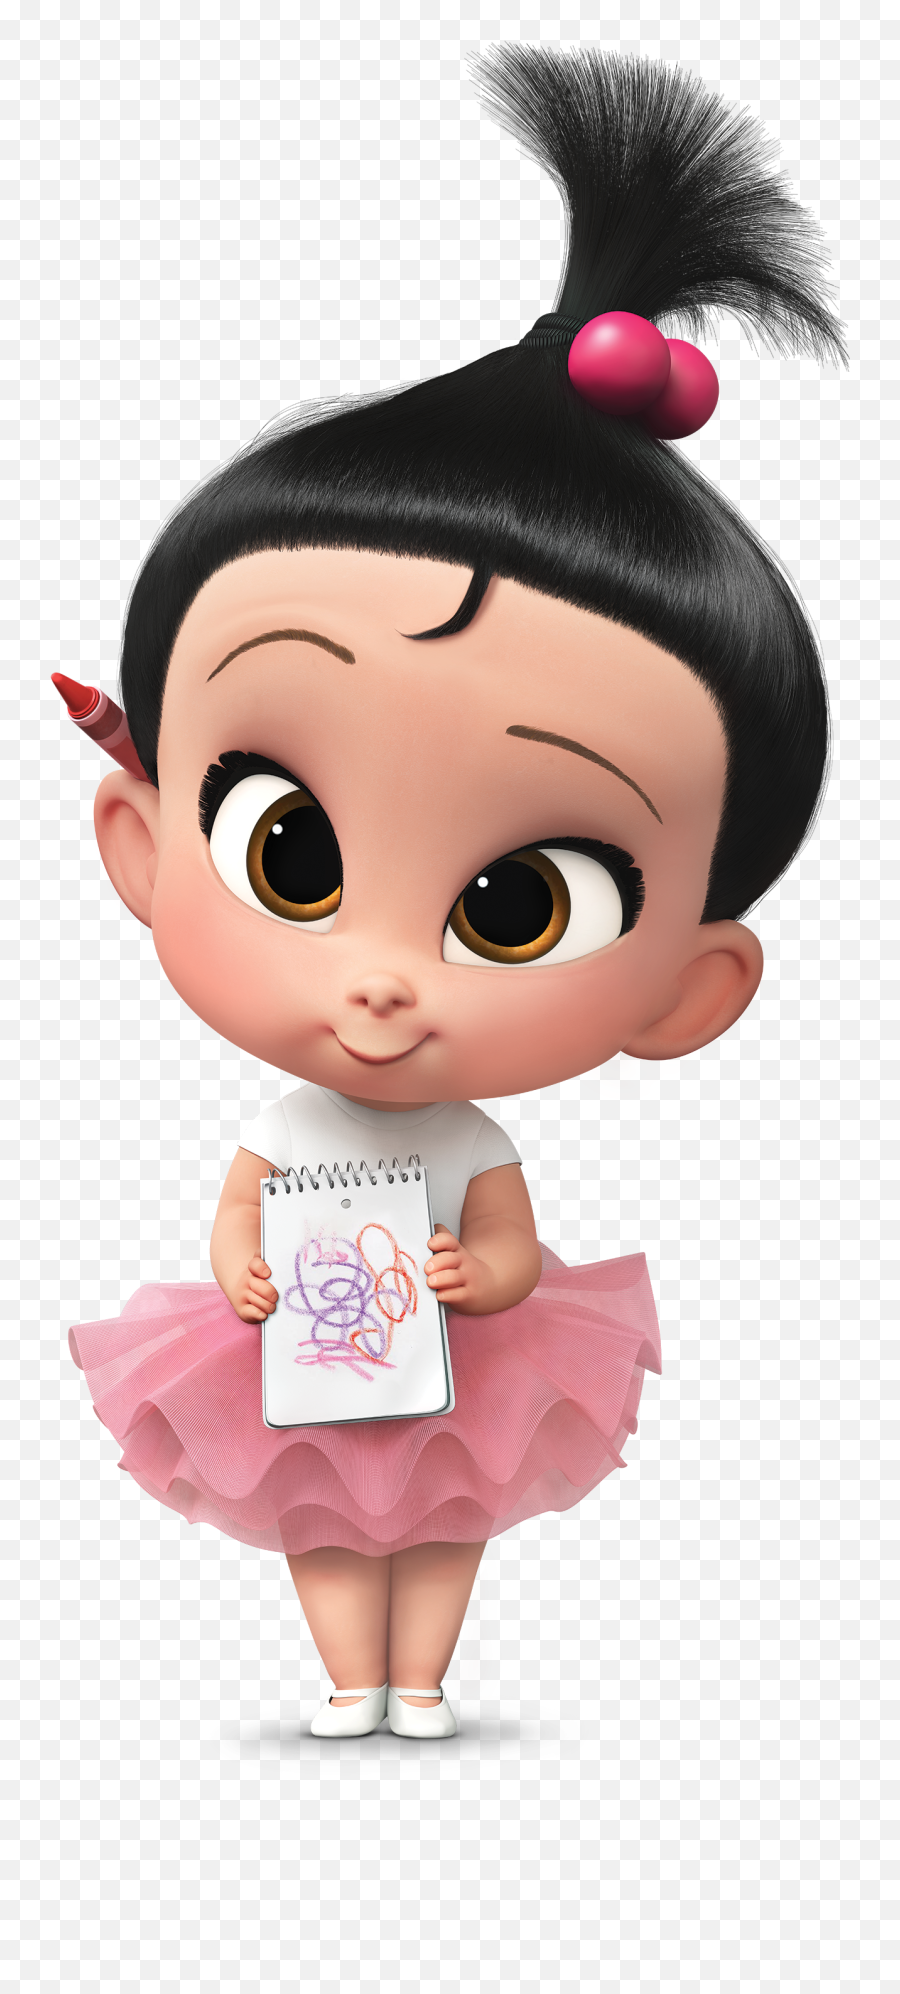 Baby Cartoon Characters - Boss Baby Girl Emoji,3d Animated Emoji For Android